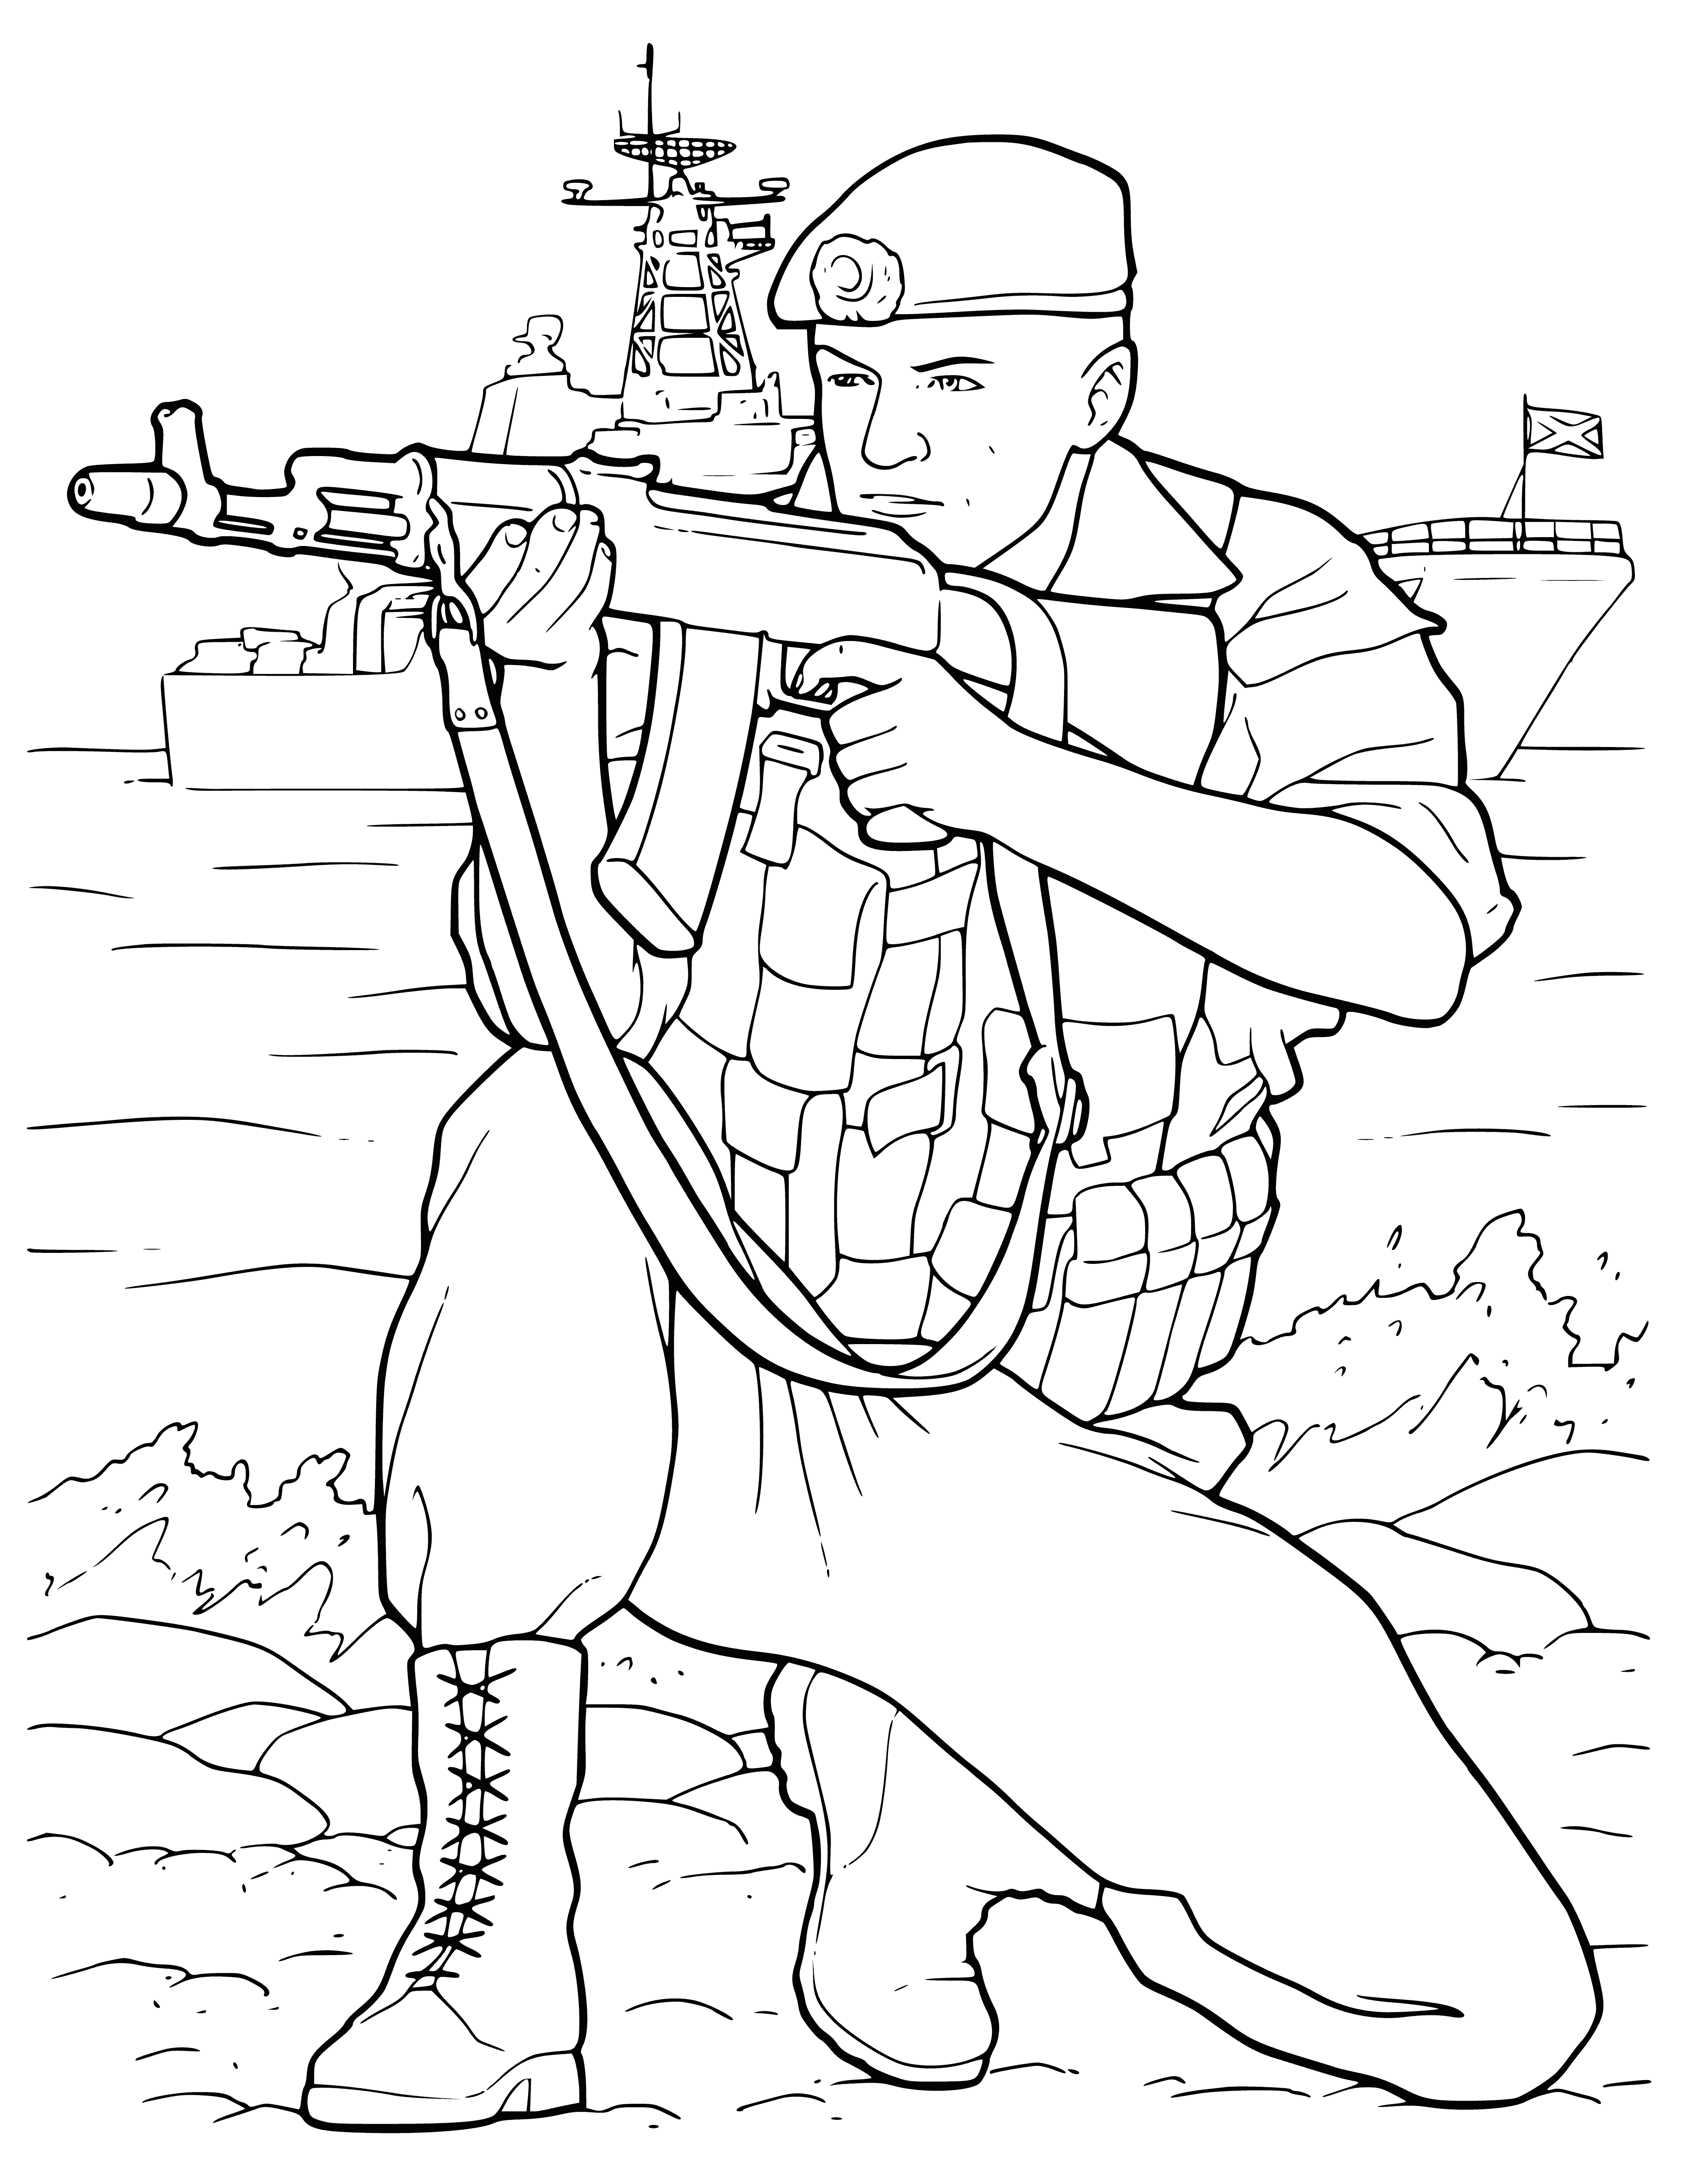 coloring page: Soldiers in uniform line up, carrying guns: rifles, pistols, green camo pants, brown boots, jackets, helmets, ammo pouches.